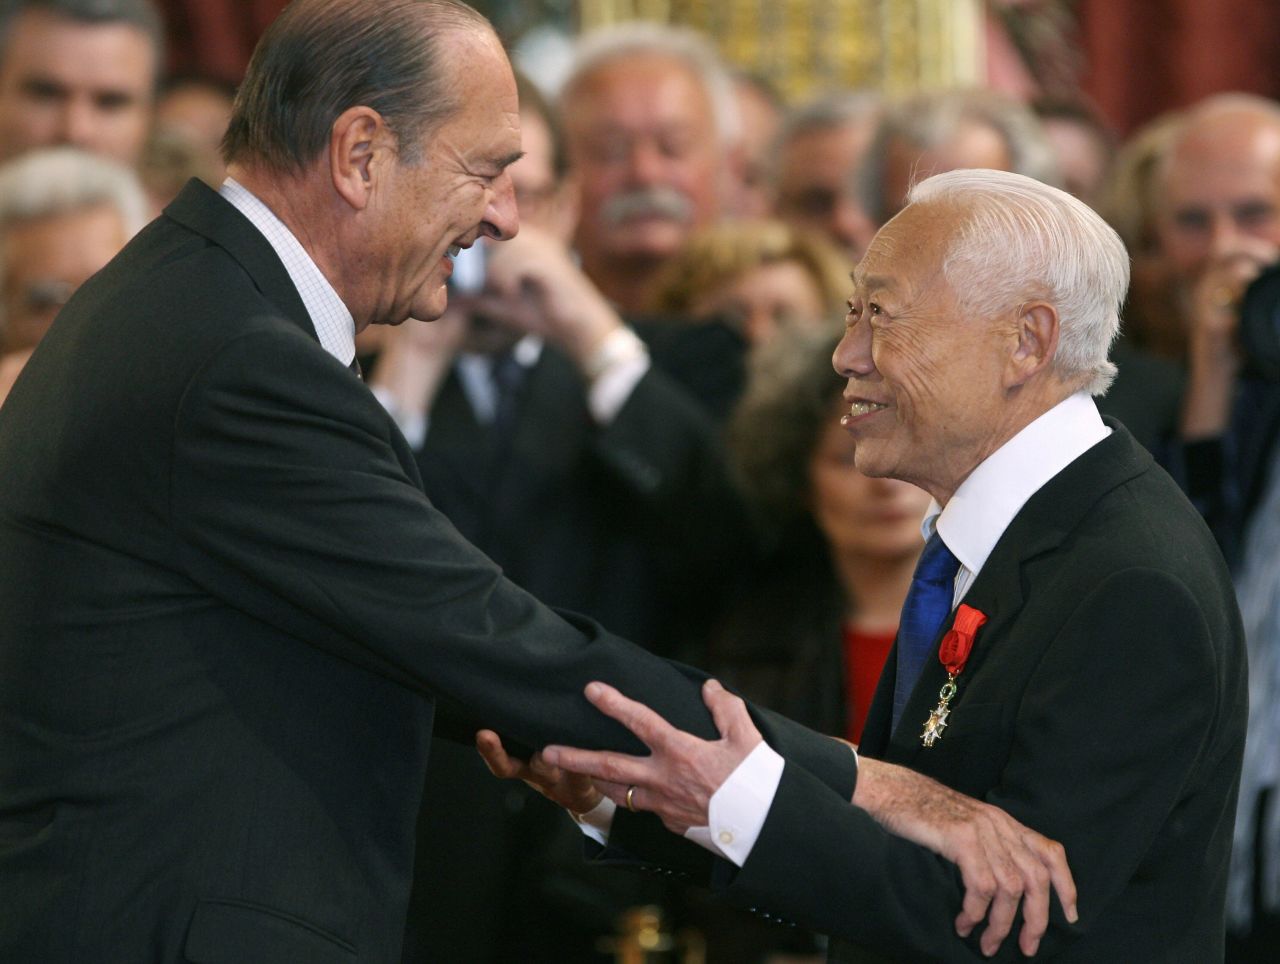 French President Jacques Chirac (L) gives the insignia of the 'Grand Officier de la Legion d'honneur' (Legion of Honor) to Zao Wou-ki at the Elysee Palace in Paris in November 2006. 